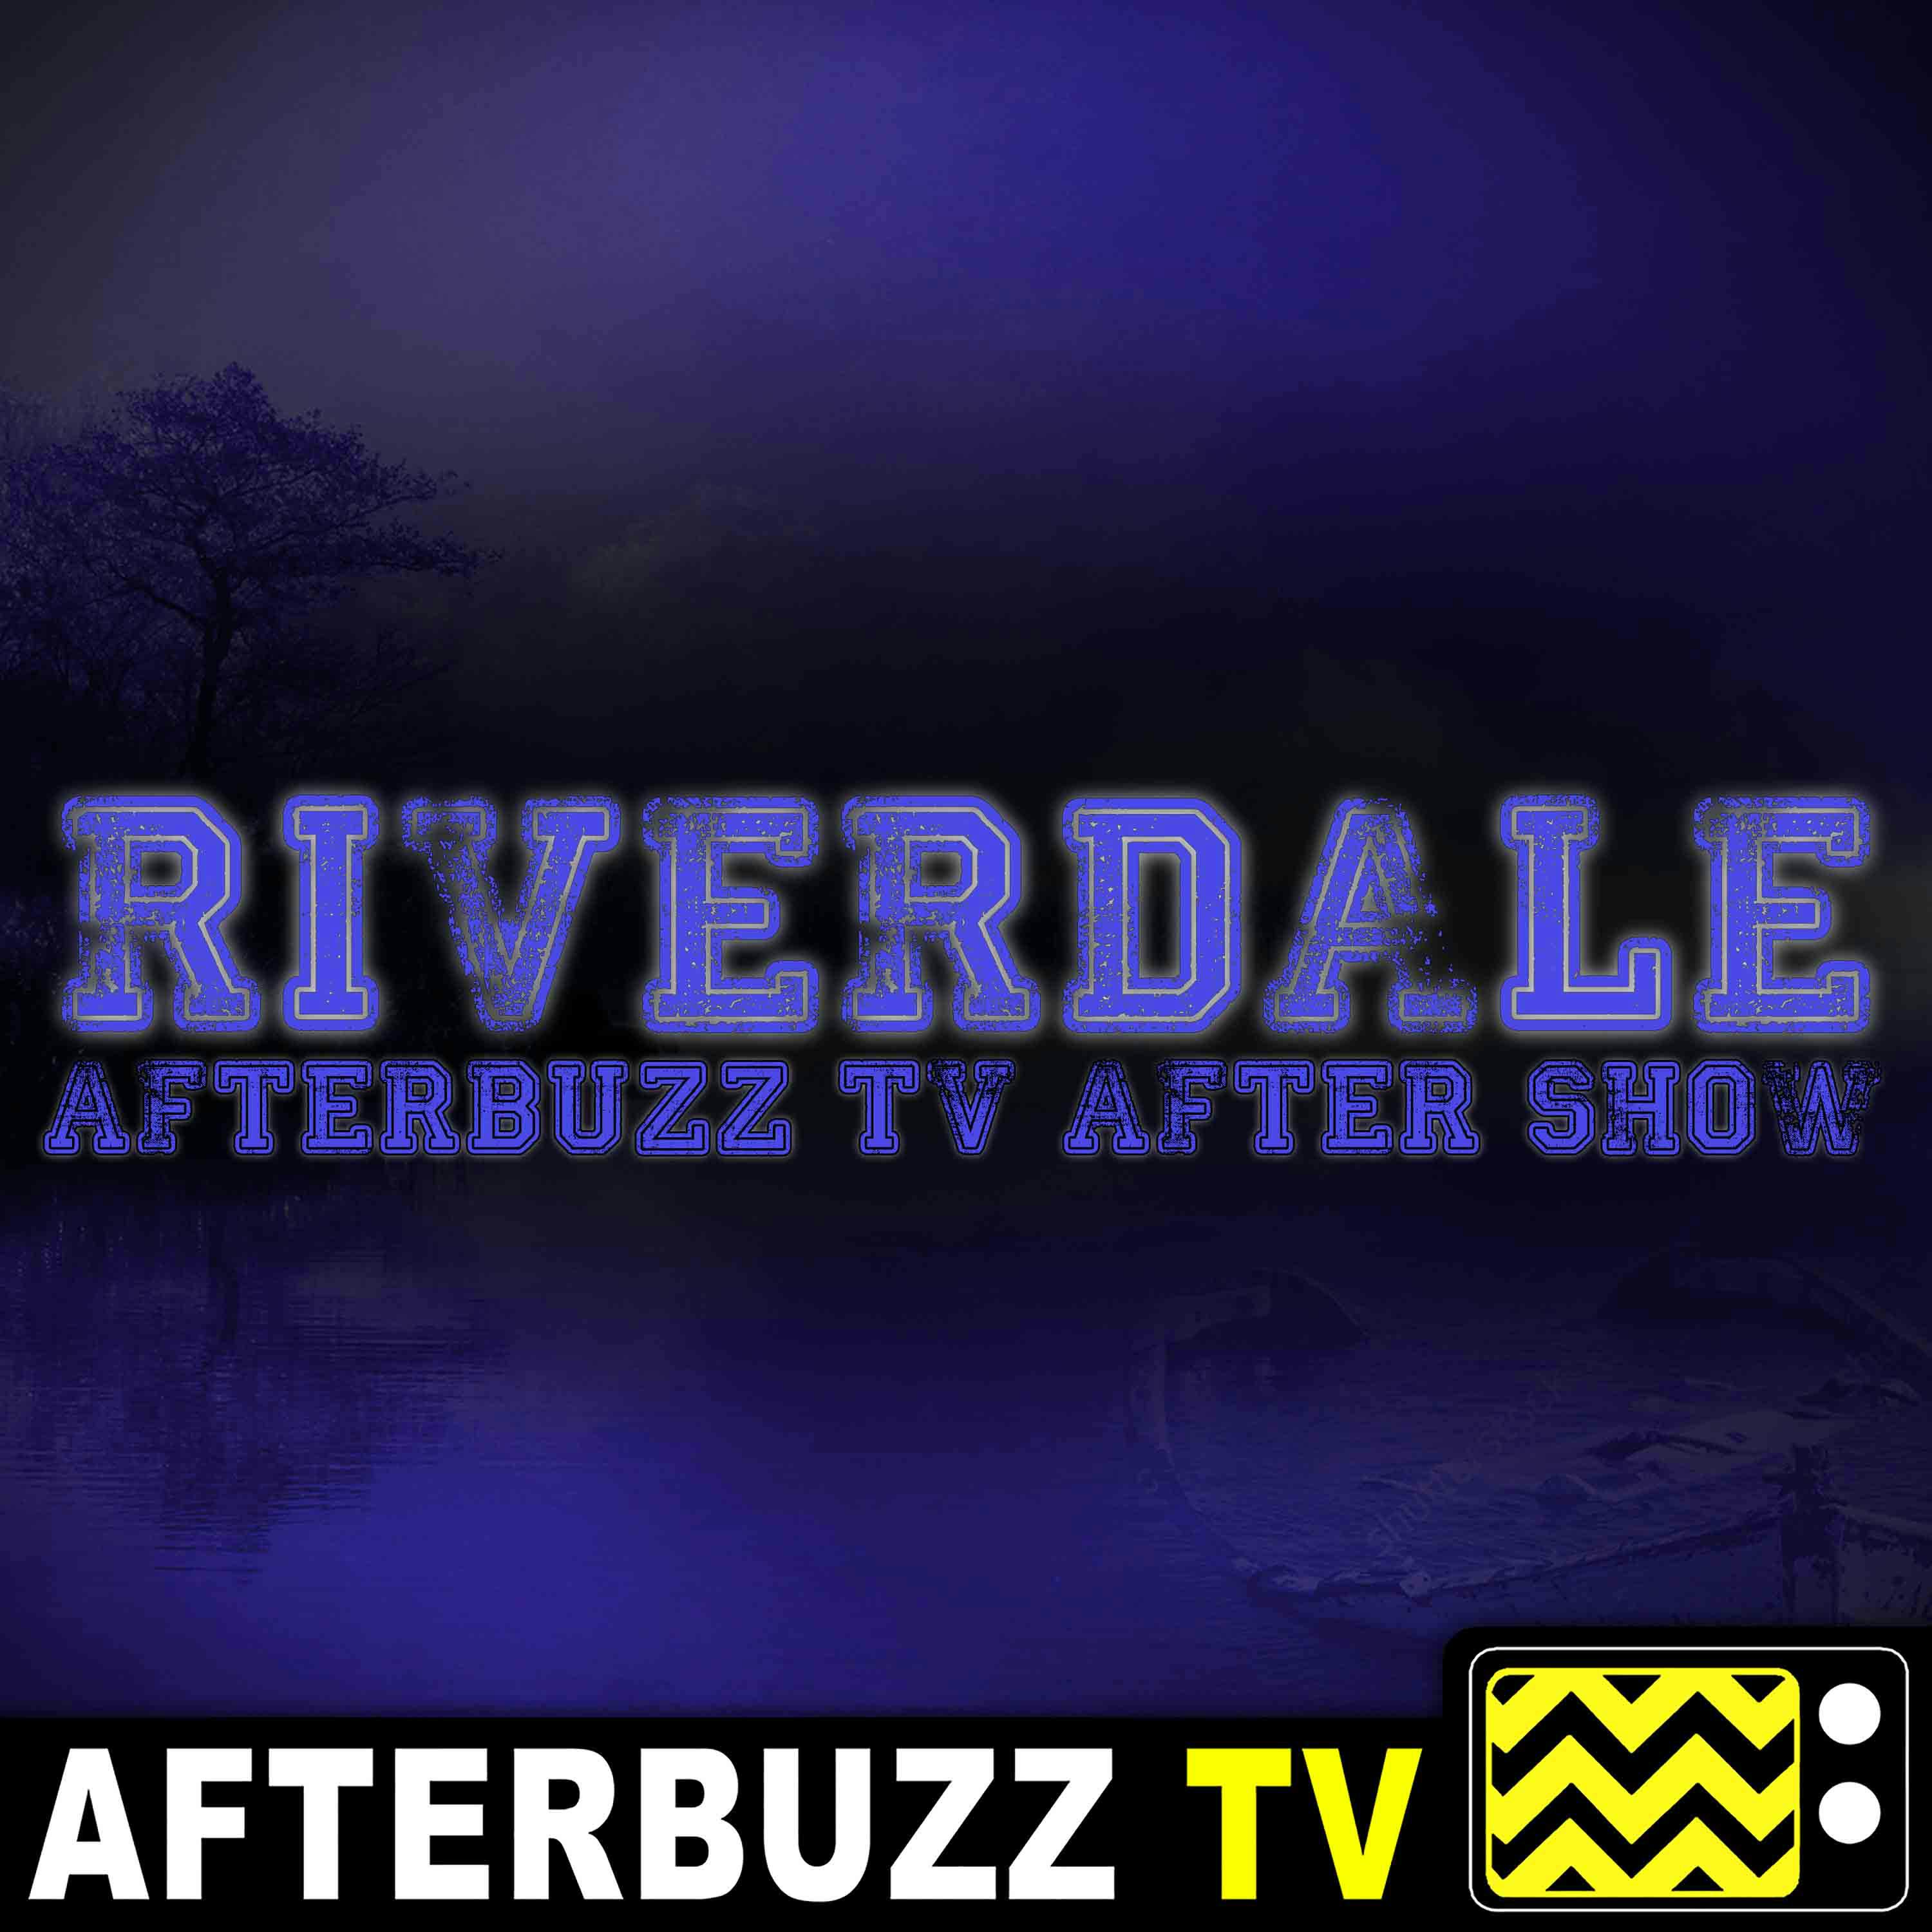 "Dog Day Afternoon" Season 4 Episode 3 'Riverdale' Review